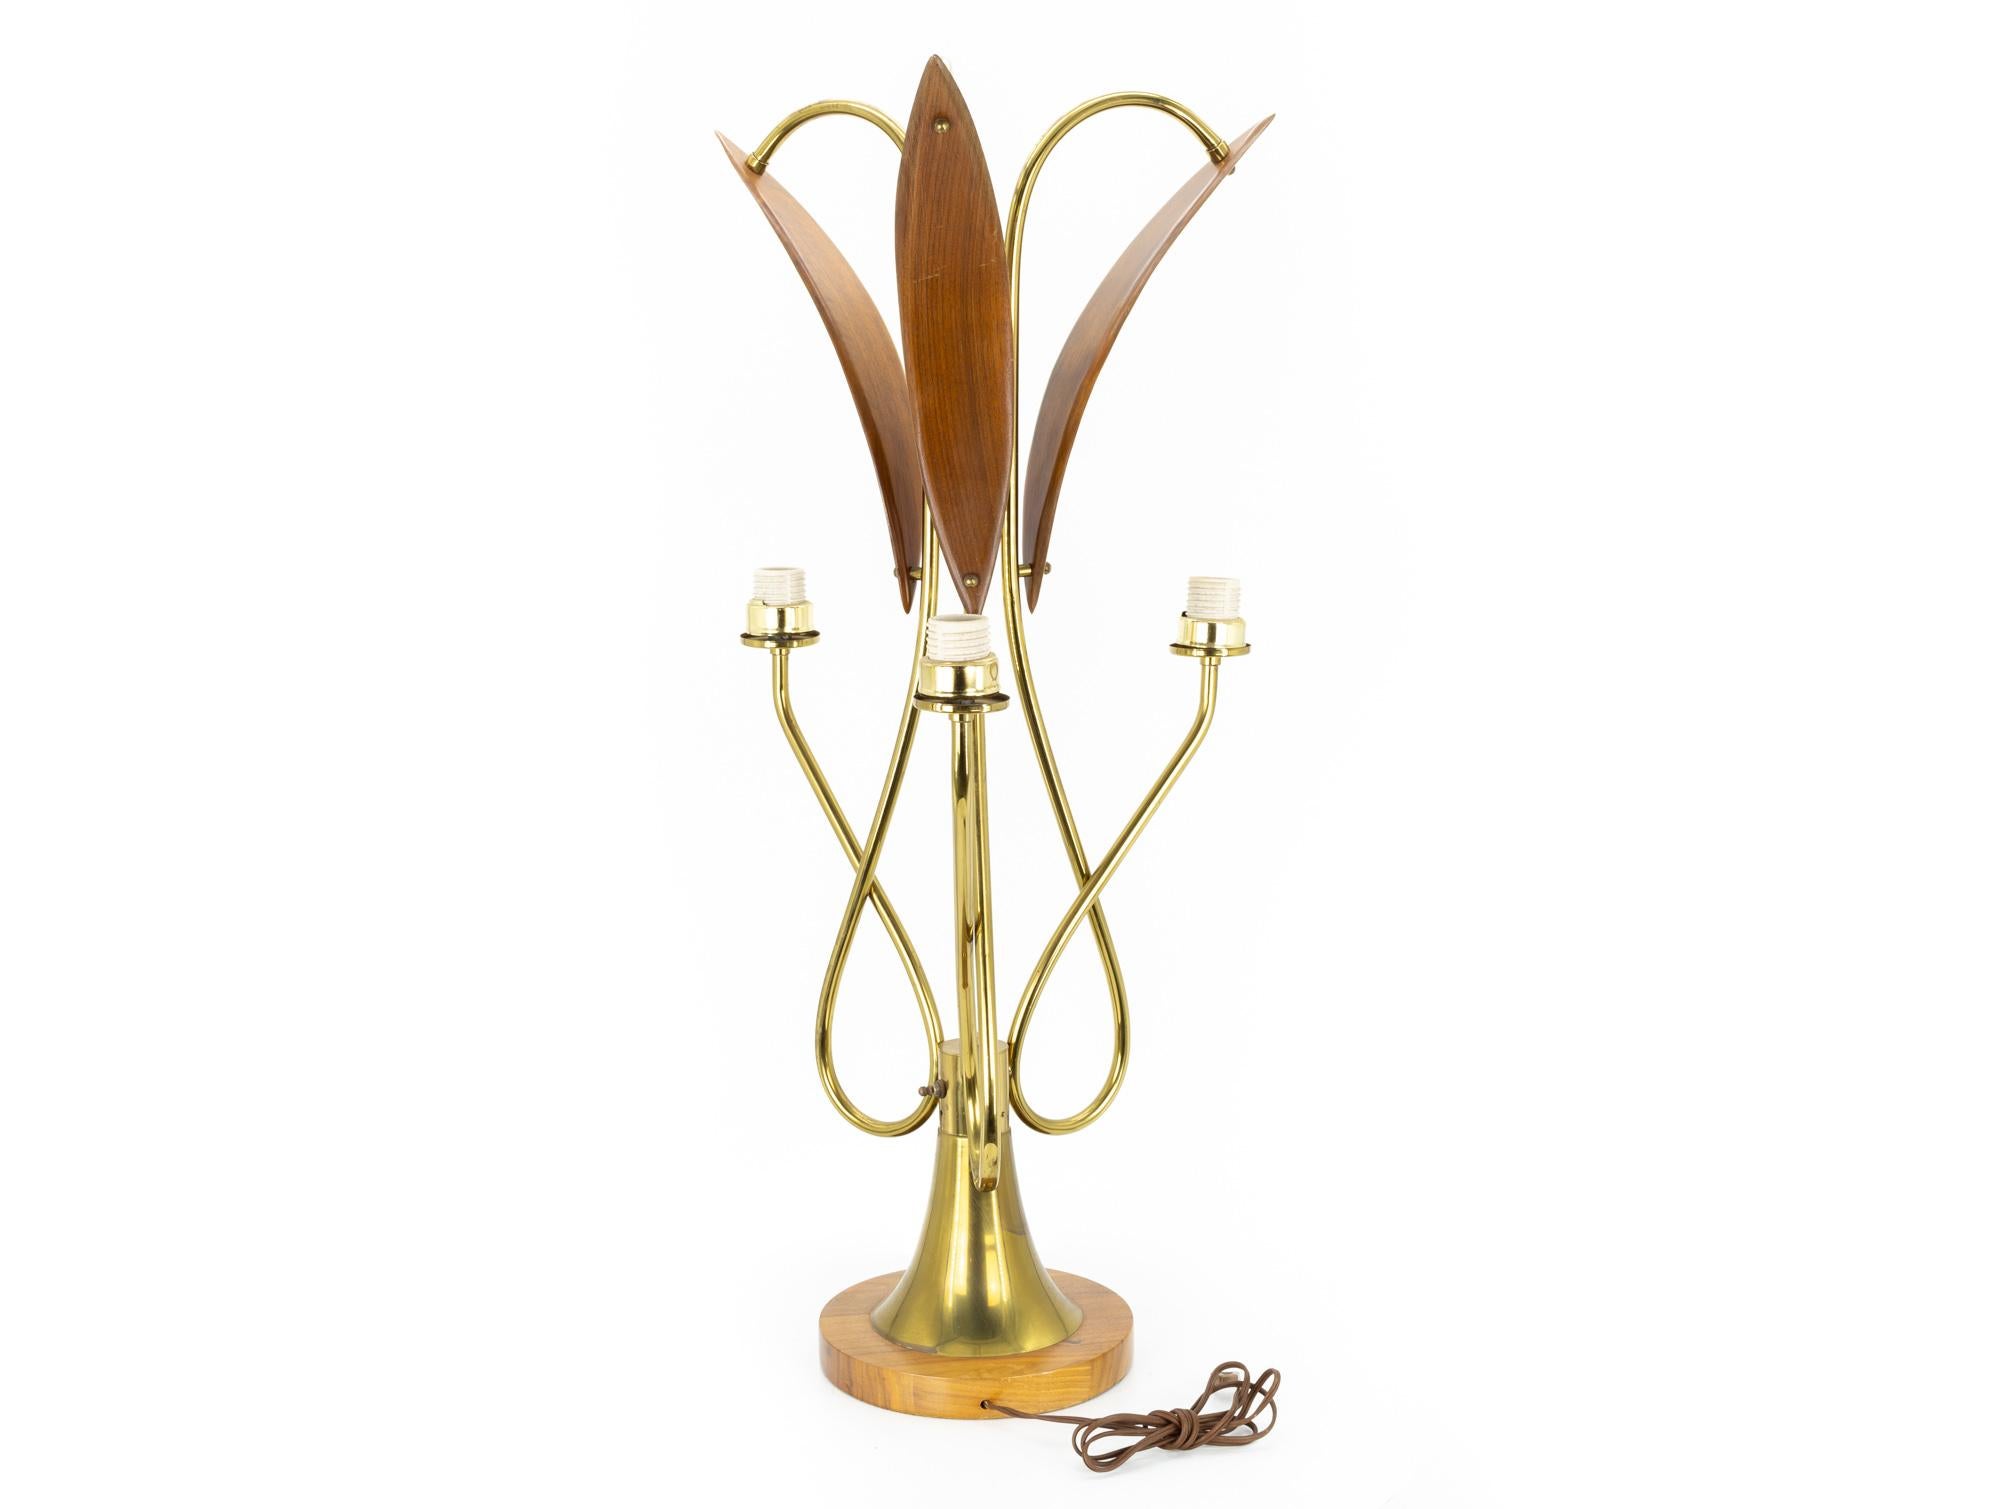 American Nomina Organica Mid Century Brass Walnut Lamps - Pair For Sale